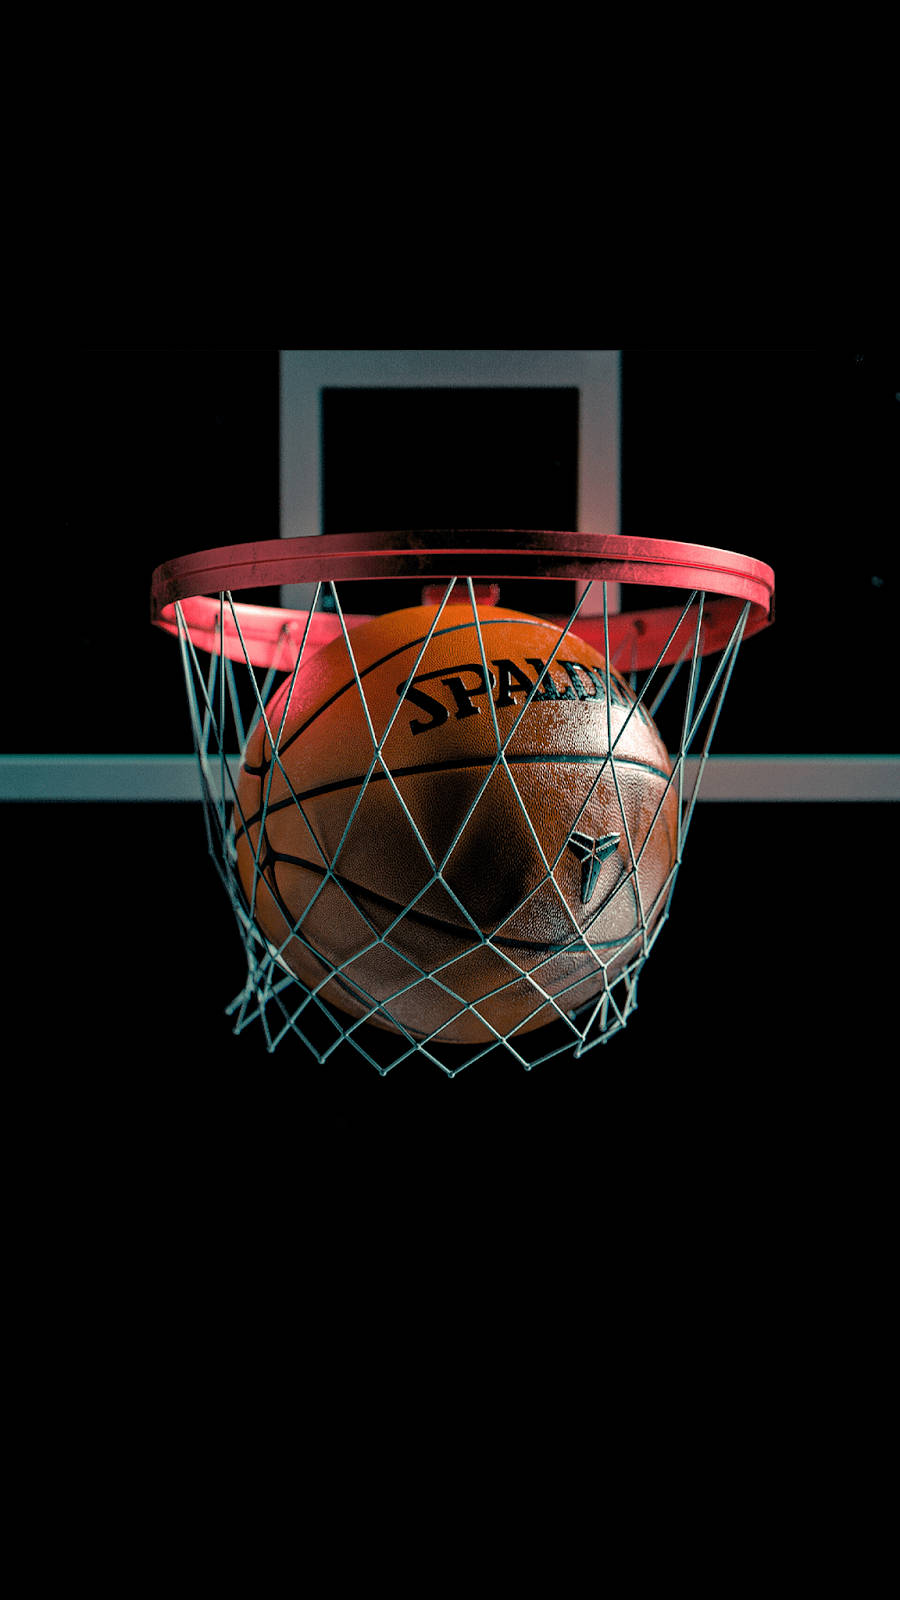 Hd Basketball Ball In Ring Background